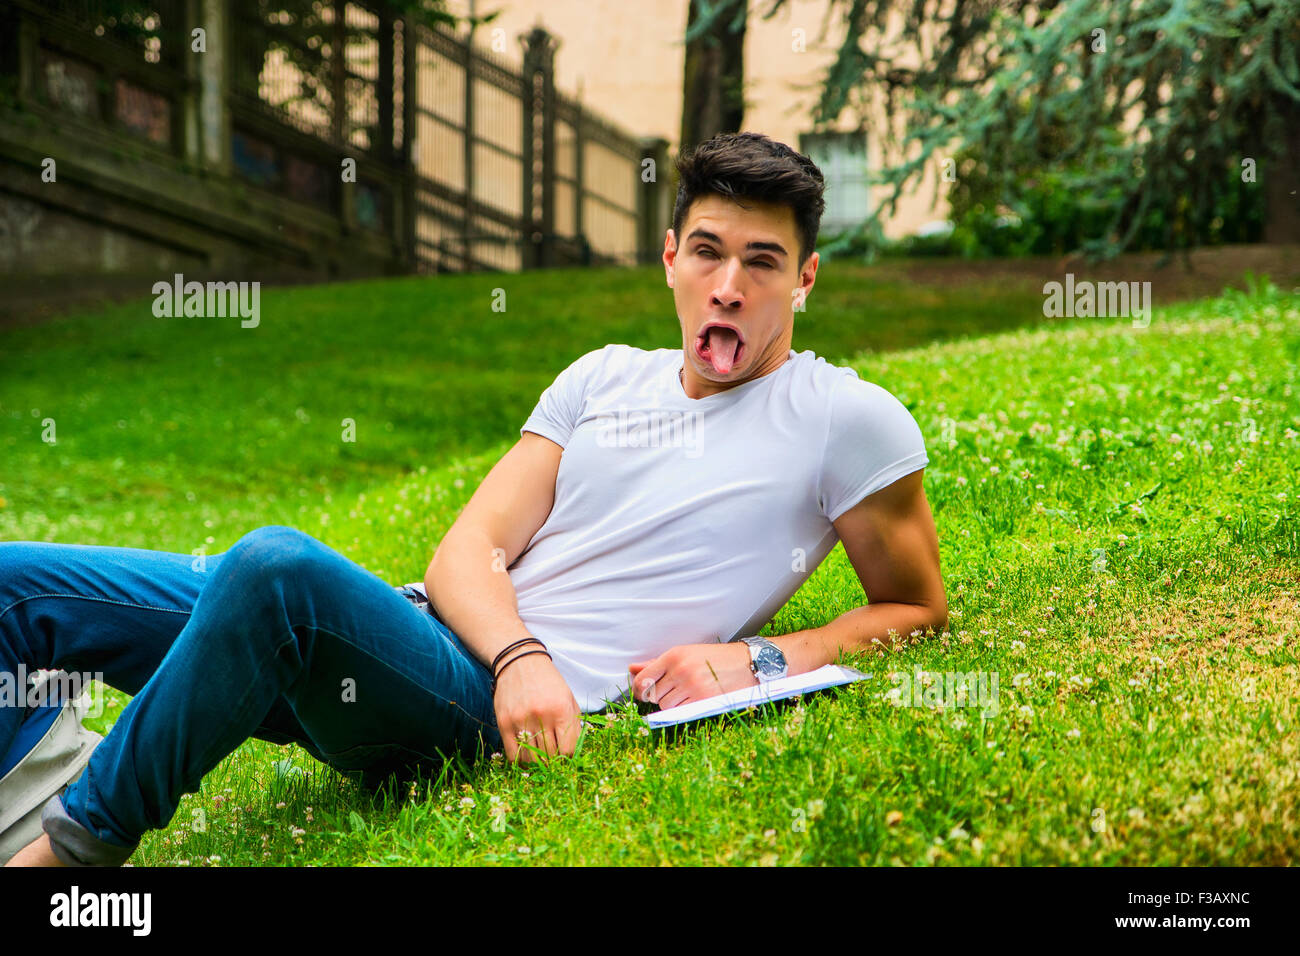 Young Male Student Doing Silly Face While Studying his Lessons, Lying on Grass in City Park Stock Photo